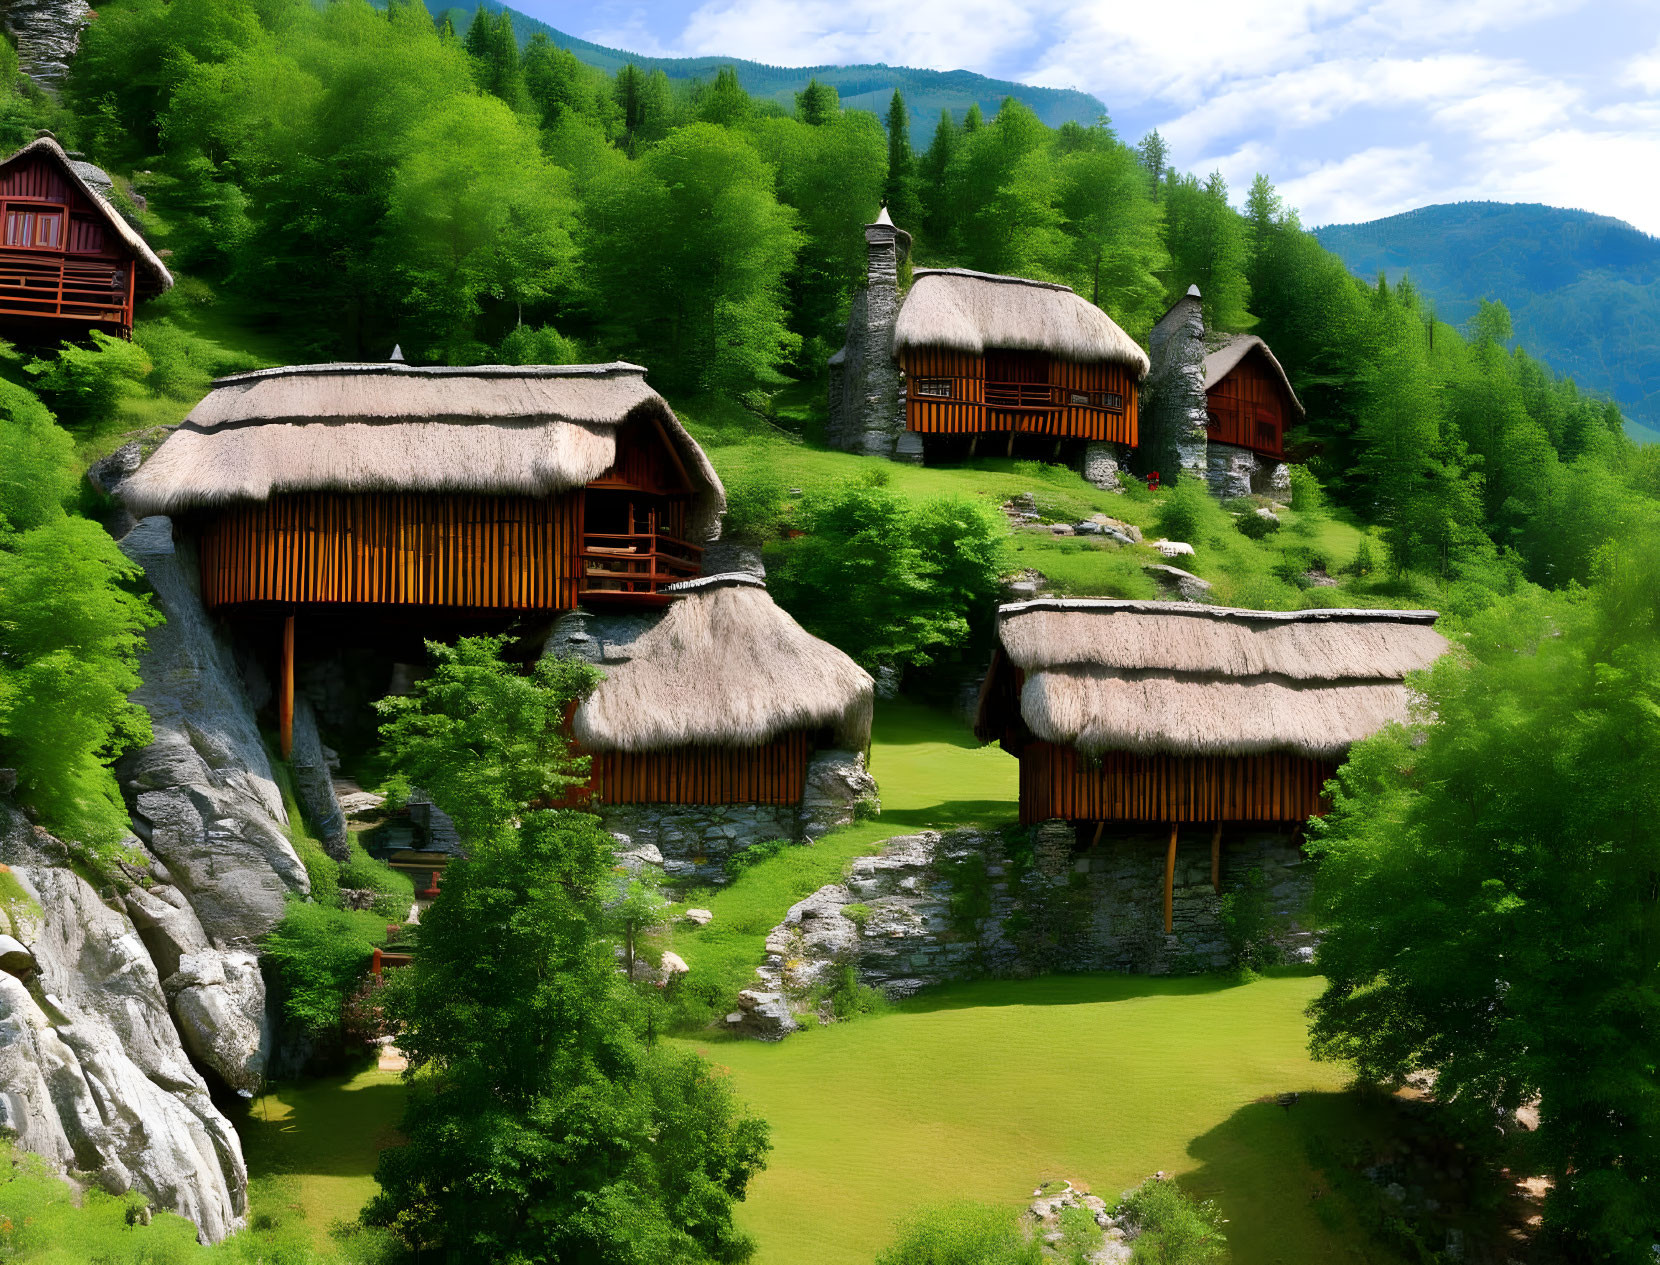 Thatched-Roof Cottages in Verdant Hills and Meadow